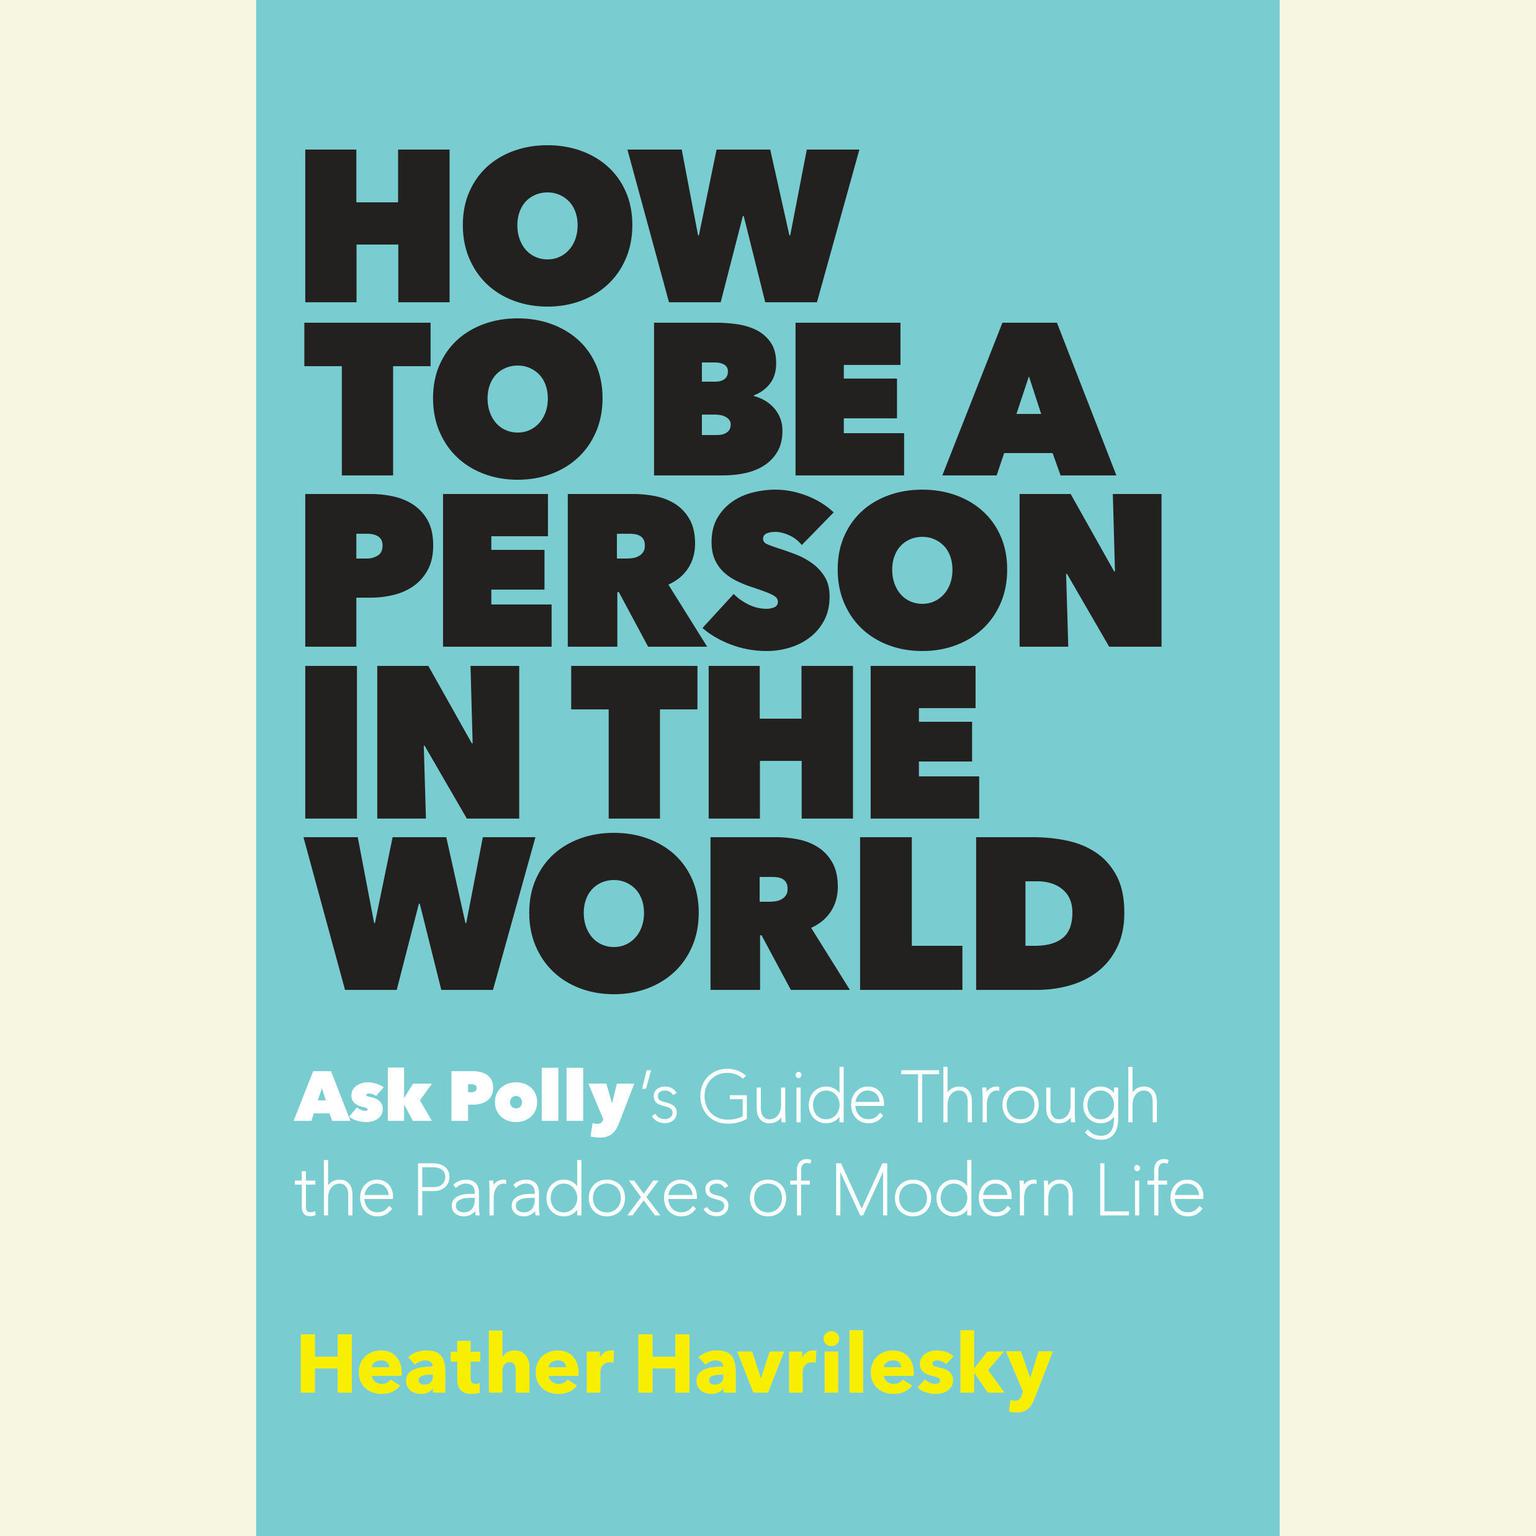 How to Be a Person in the World: Ask Pollys Guide Through the Paradoxes of Modern Life Audiobook, by Heather Havrilesky